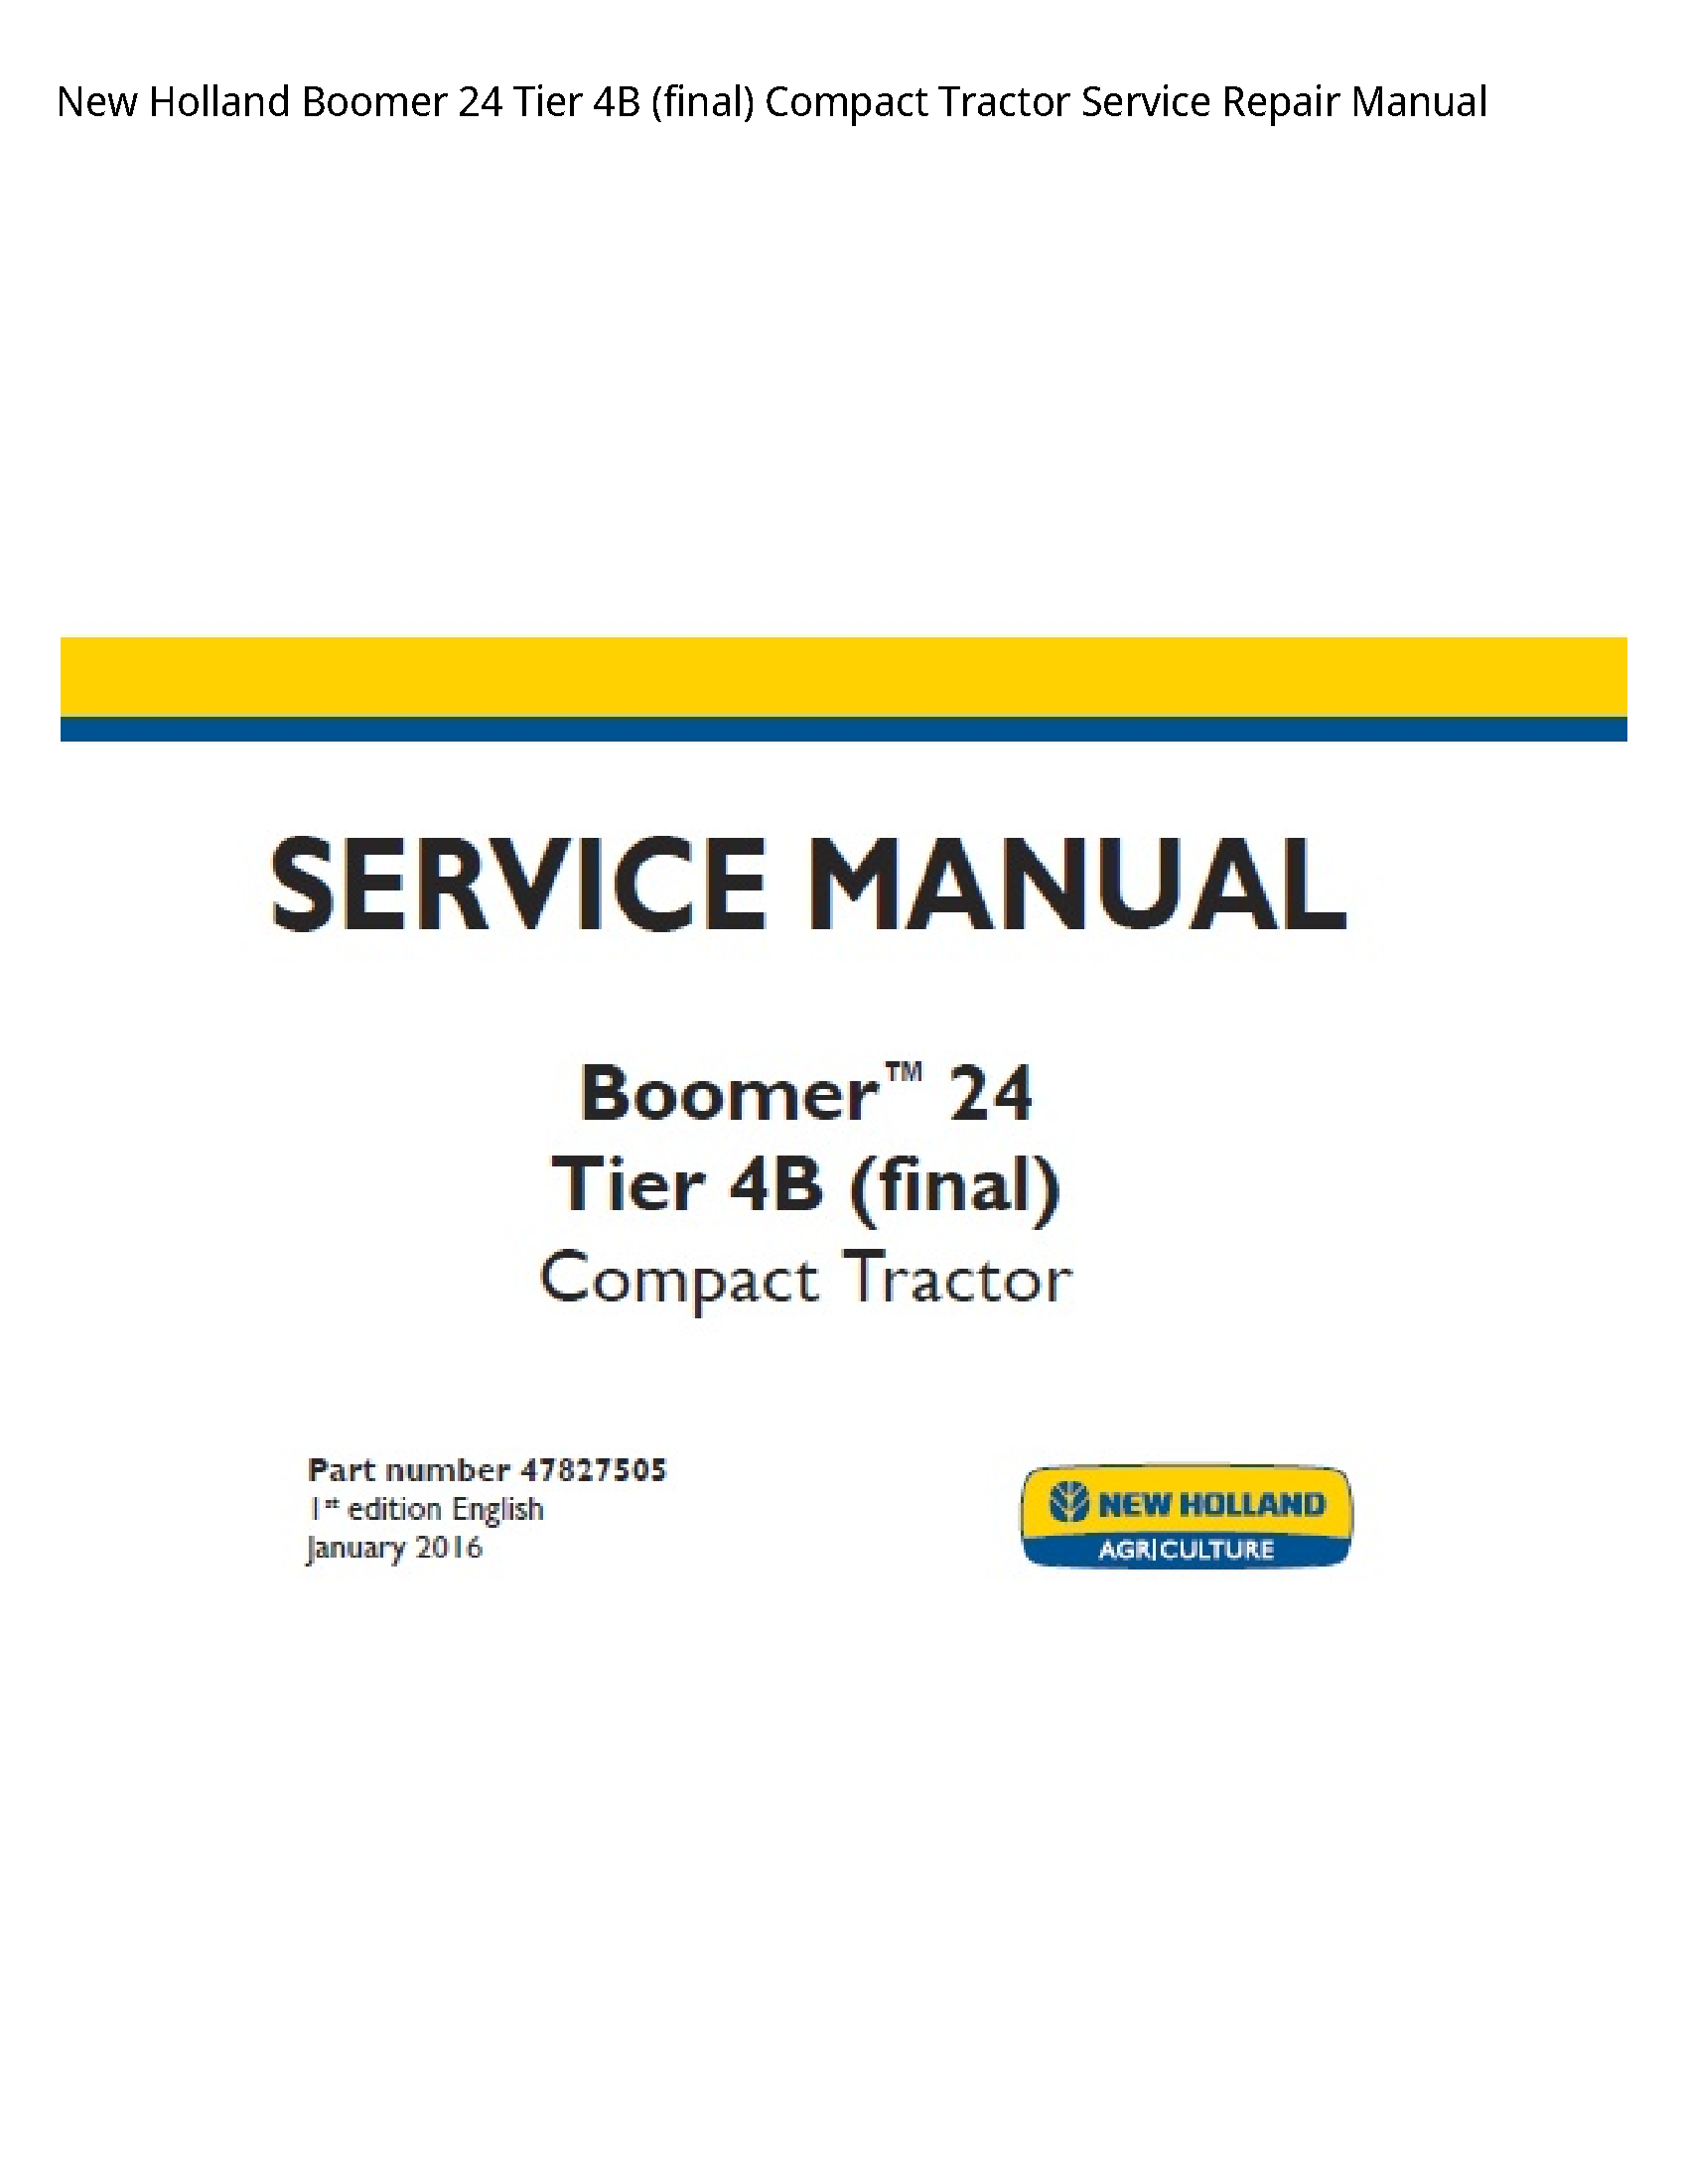 New Holland 24 Boomer Tier (final) Compact Tractor manual